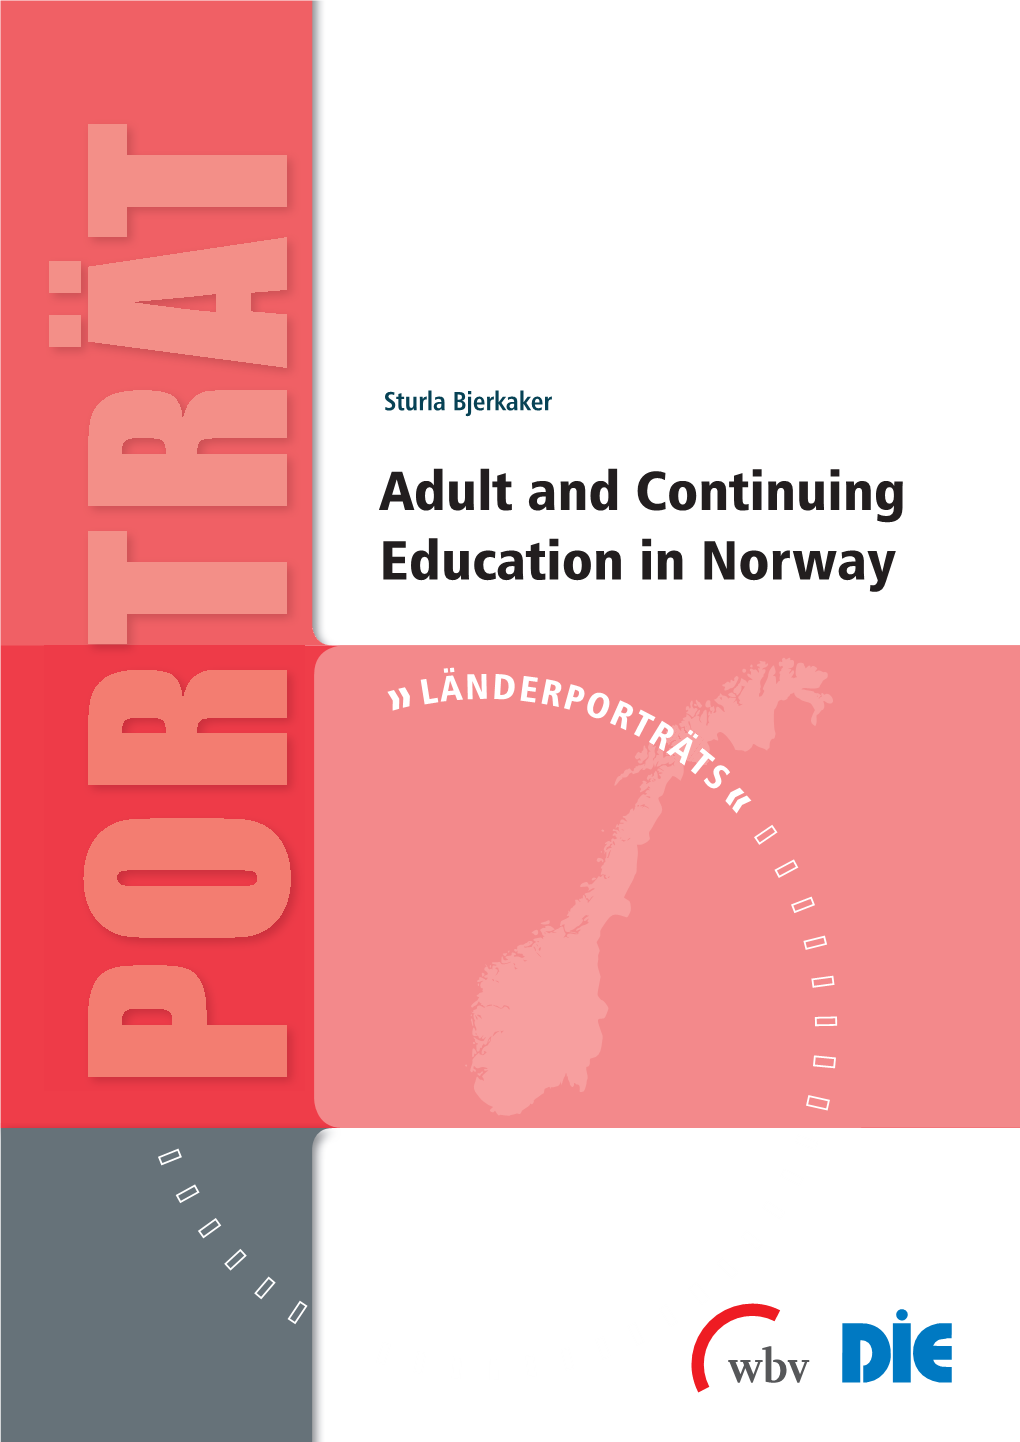 Adult and Continuing Education in Norway